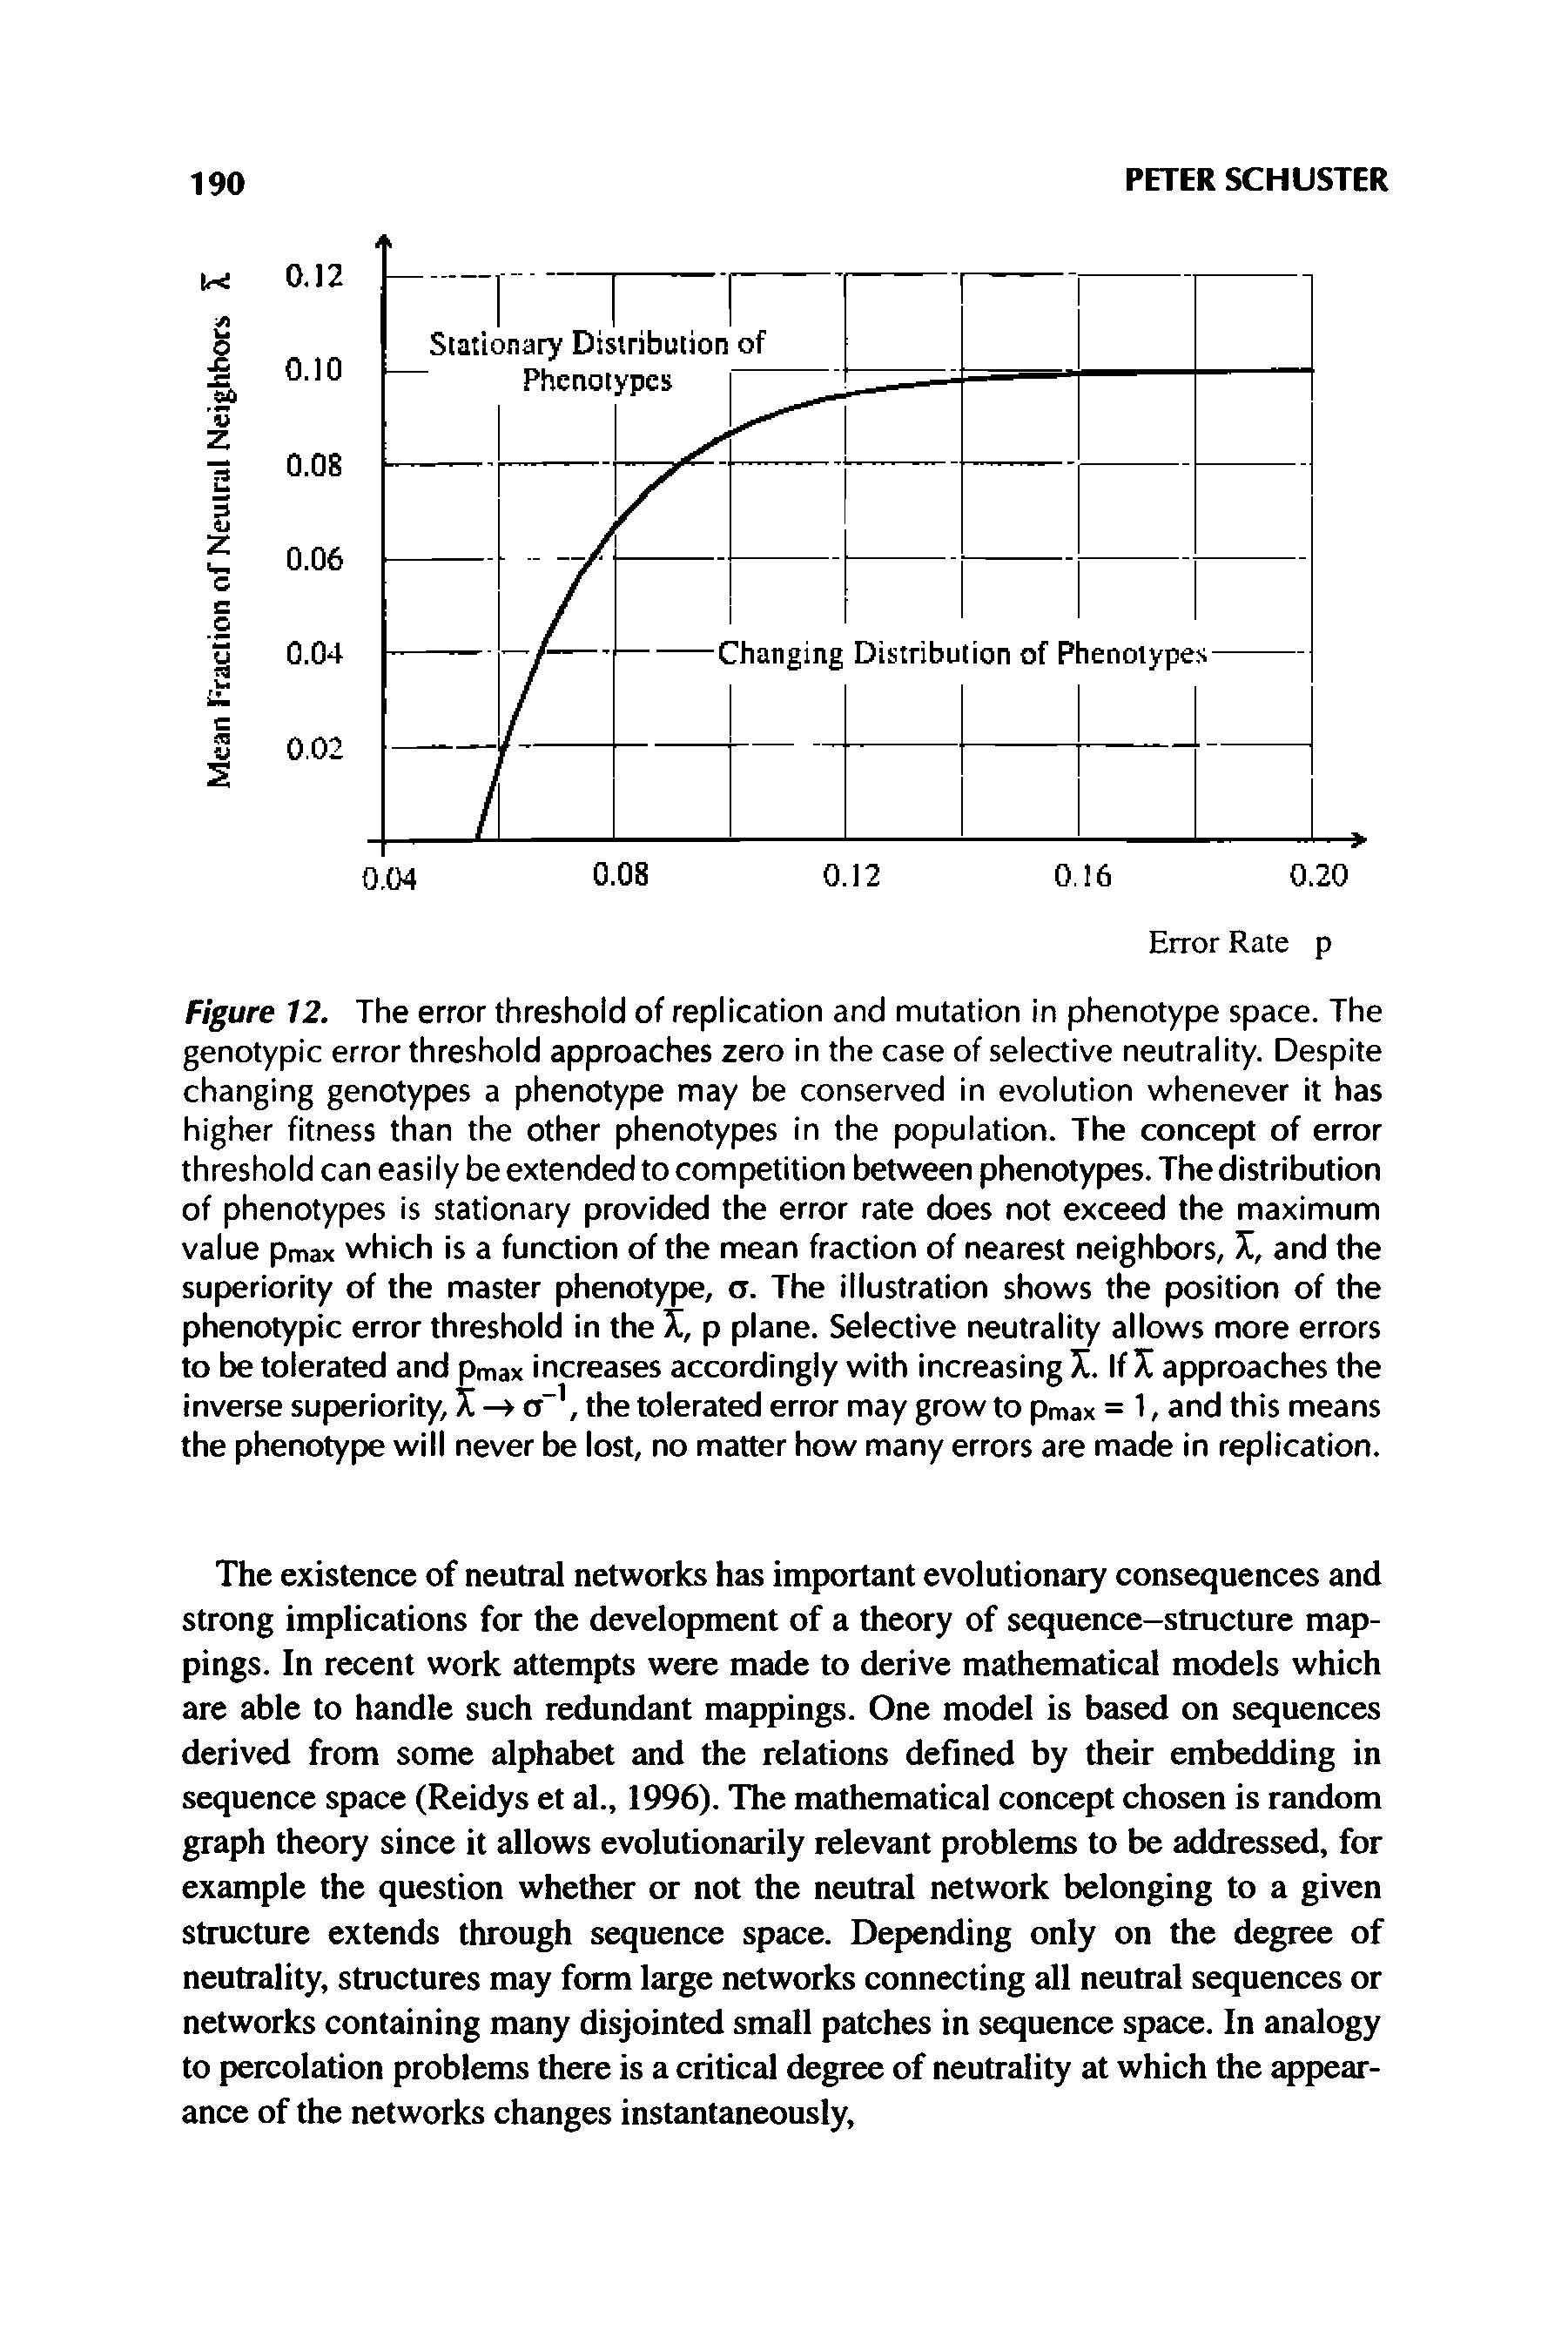 Figure 12. The error threshold of replication and mutation in phenotype space. The genotypic error threshold approaches zero in the case of selective neutrality. Despite changing genotypes a phenotype may be conserved in evolution whenever it has higher fitness than the other phenotypes in the population. The concept of error threshold can easily be extended to competition between phenotypes. The distribution of phenotypes is stationary provided the error rate does not exceed the maximum value pmax which is a function of the mean fraction of nearest neighbors, X, and the superiority of the master phenotype, a. The illustration shows the position of the phenotypic error threshold in the X, p plane. Selective neutrality allows more errors to be tolerated and pmax increases accordingly with increasing X. If X approaches the inverse superiority, X — a-1, the tolerated error may grow to pmax = 1, and this means the phenotype will never be lost, no matter how many errors are made in replication.